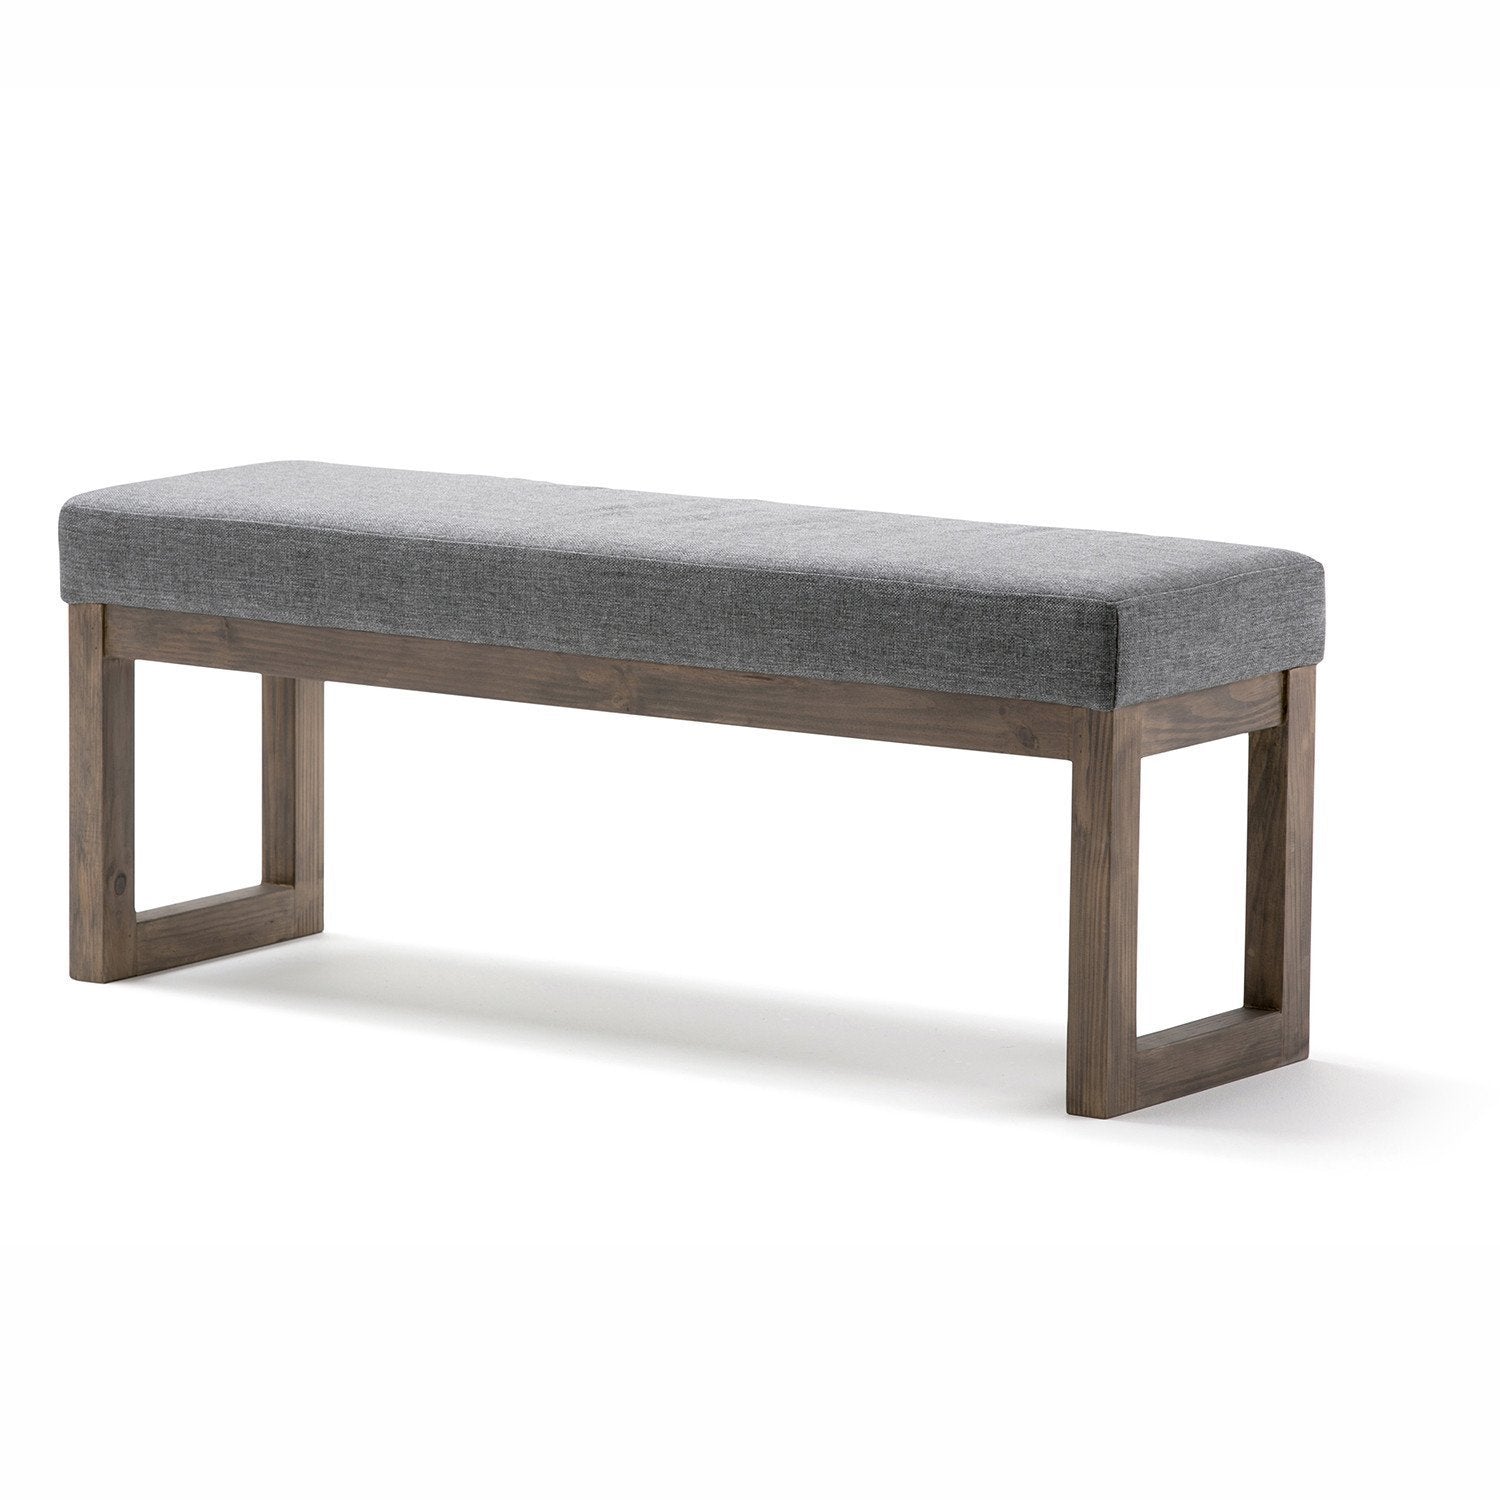 Grey Linen Style Fabric | Milltown 44 inch Large Ottoman Bench in Linen Style Fabric in Grey